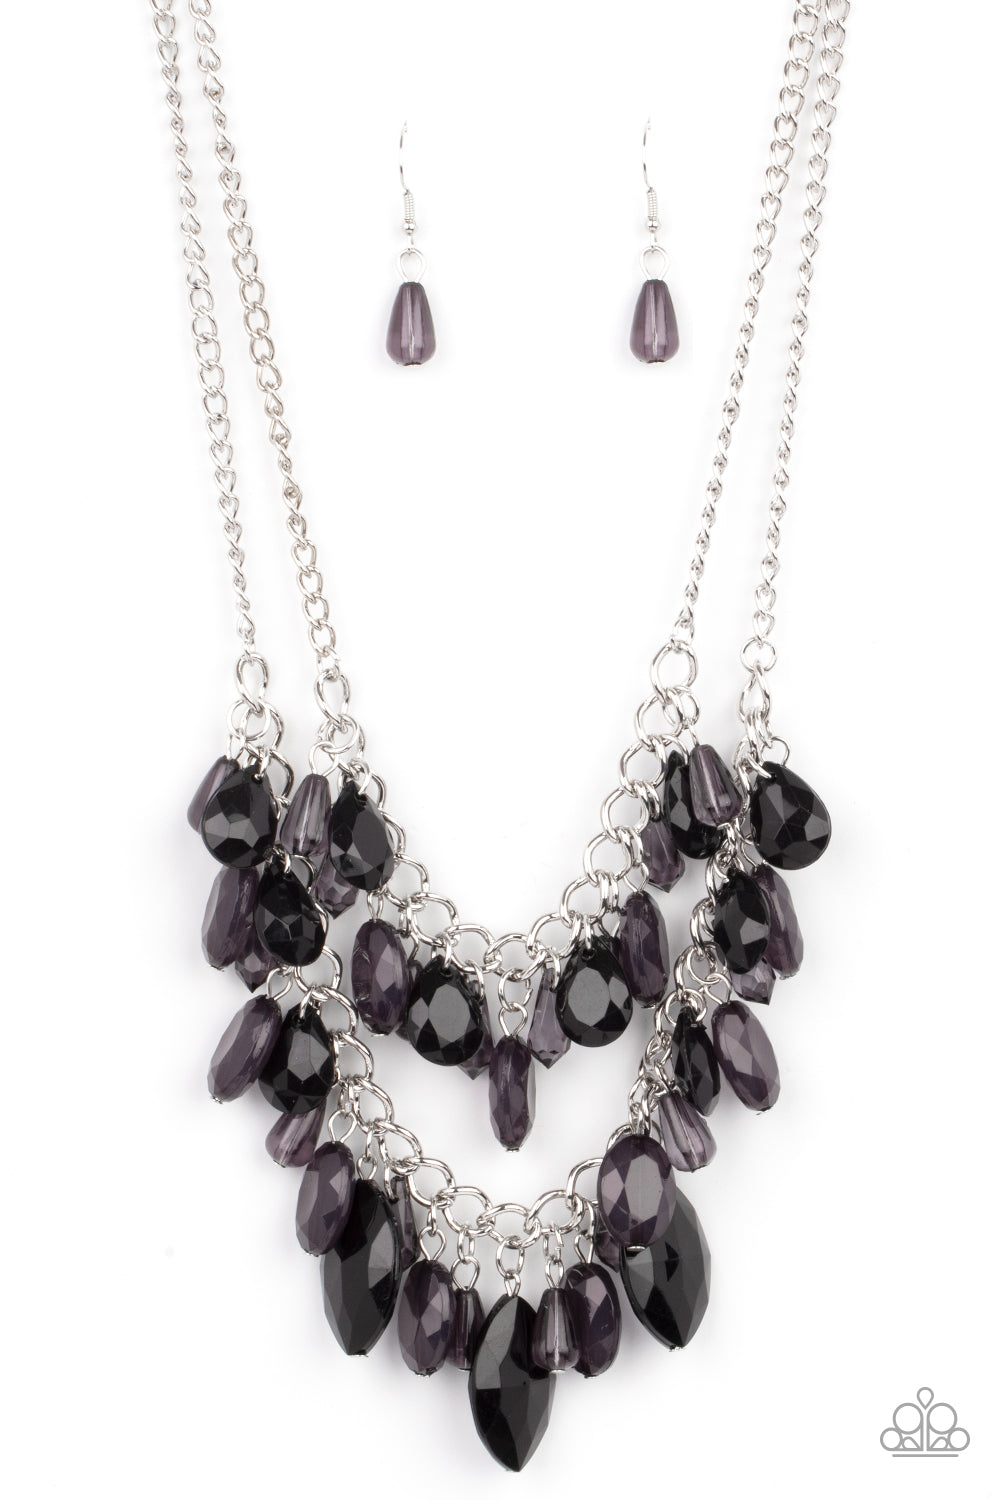 Paparazzi Midsummer Mixer - Black Necklace - A Finishing Touch Jewelry